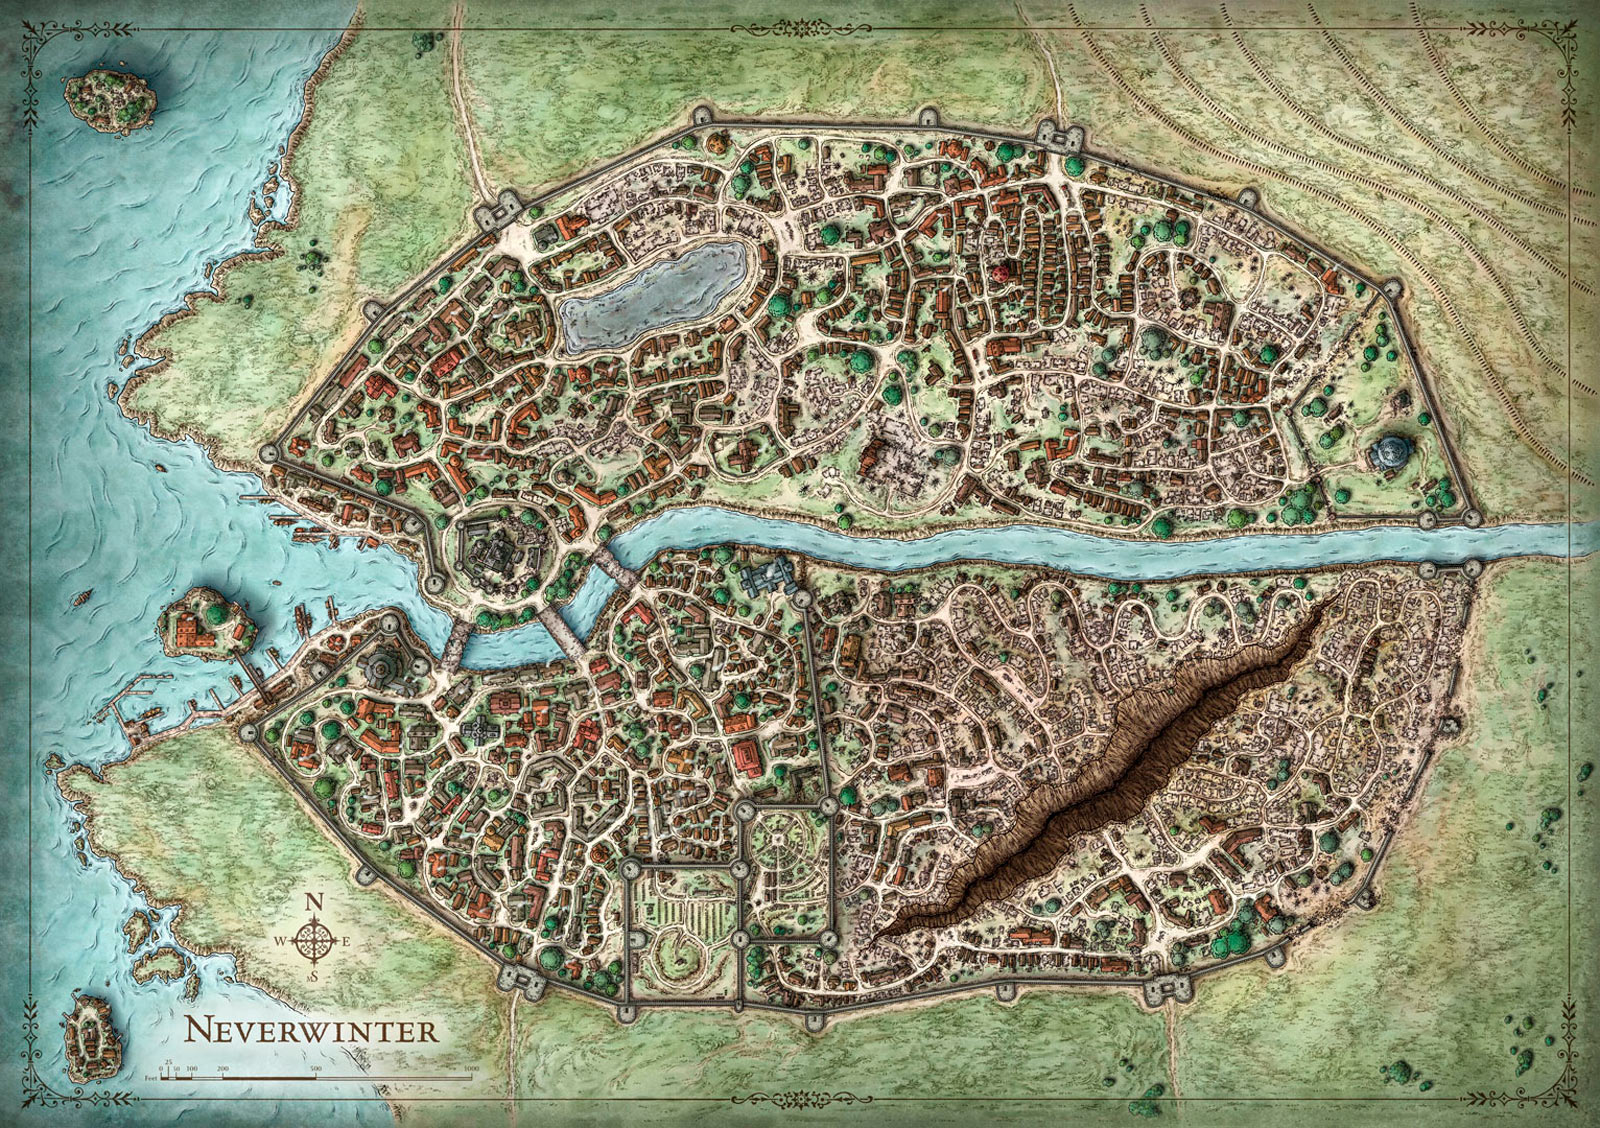 Neverwinter Map by Mike Schley